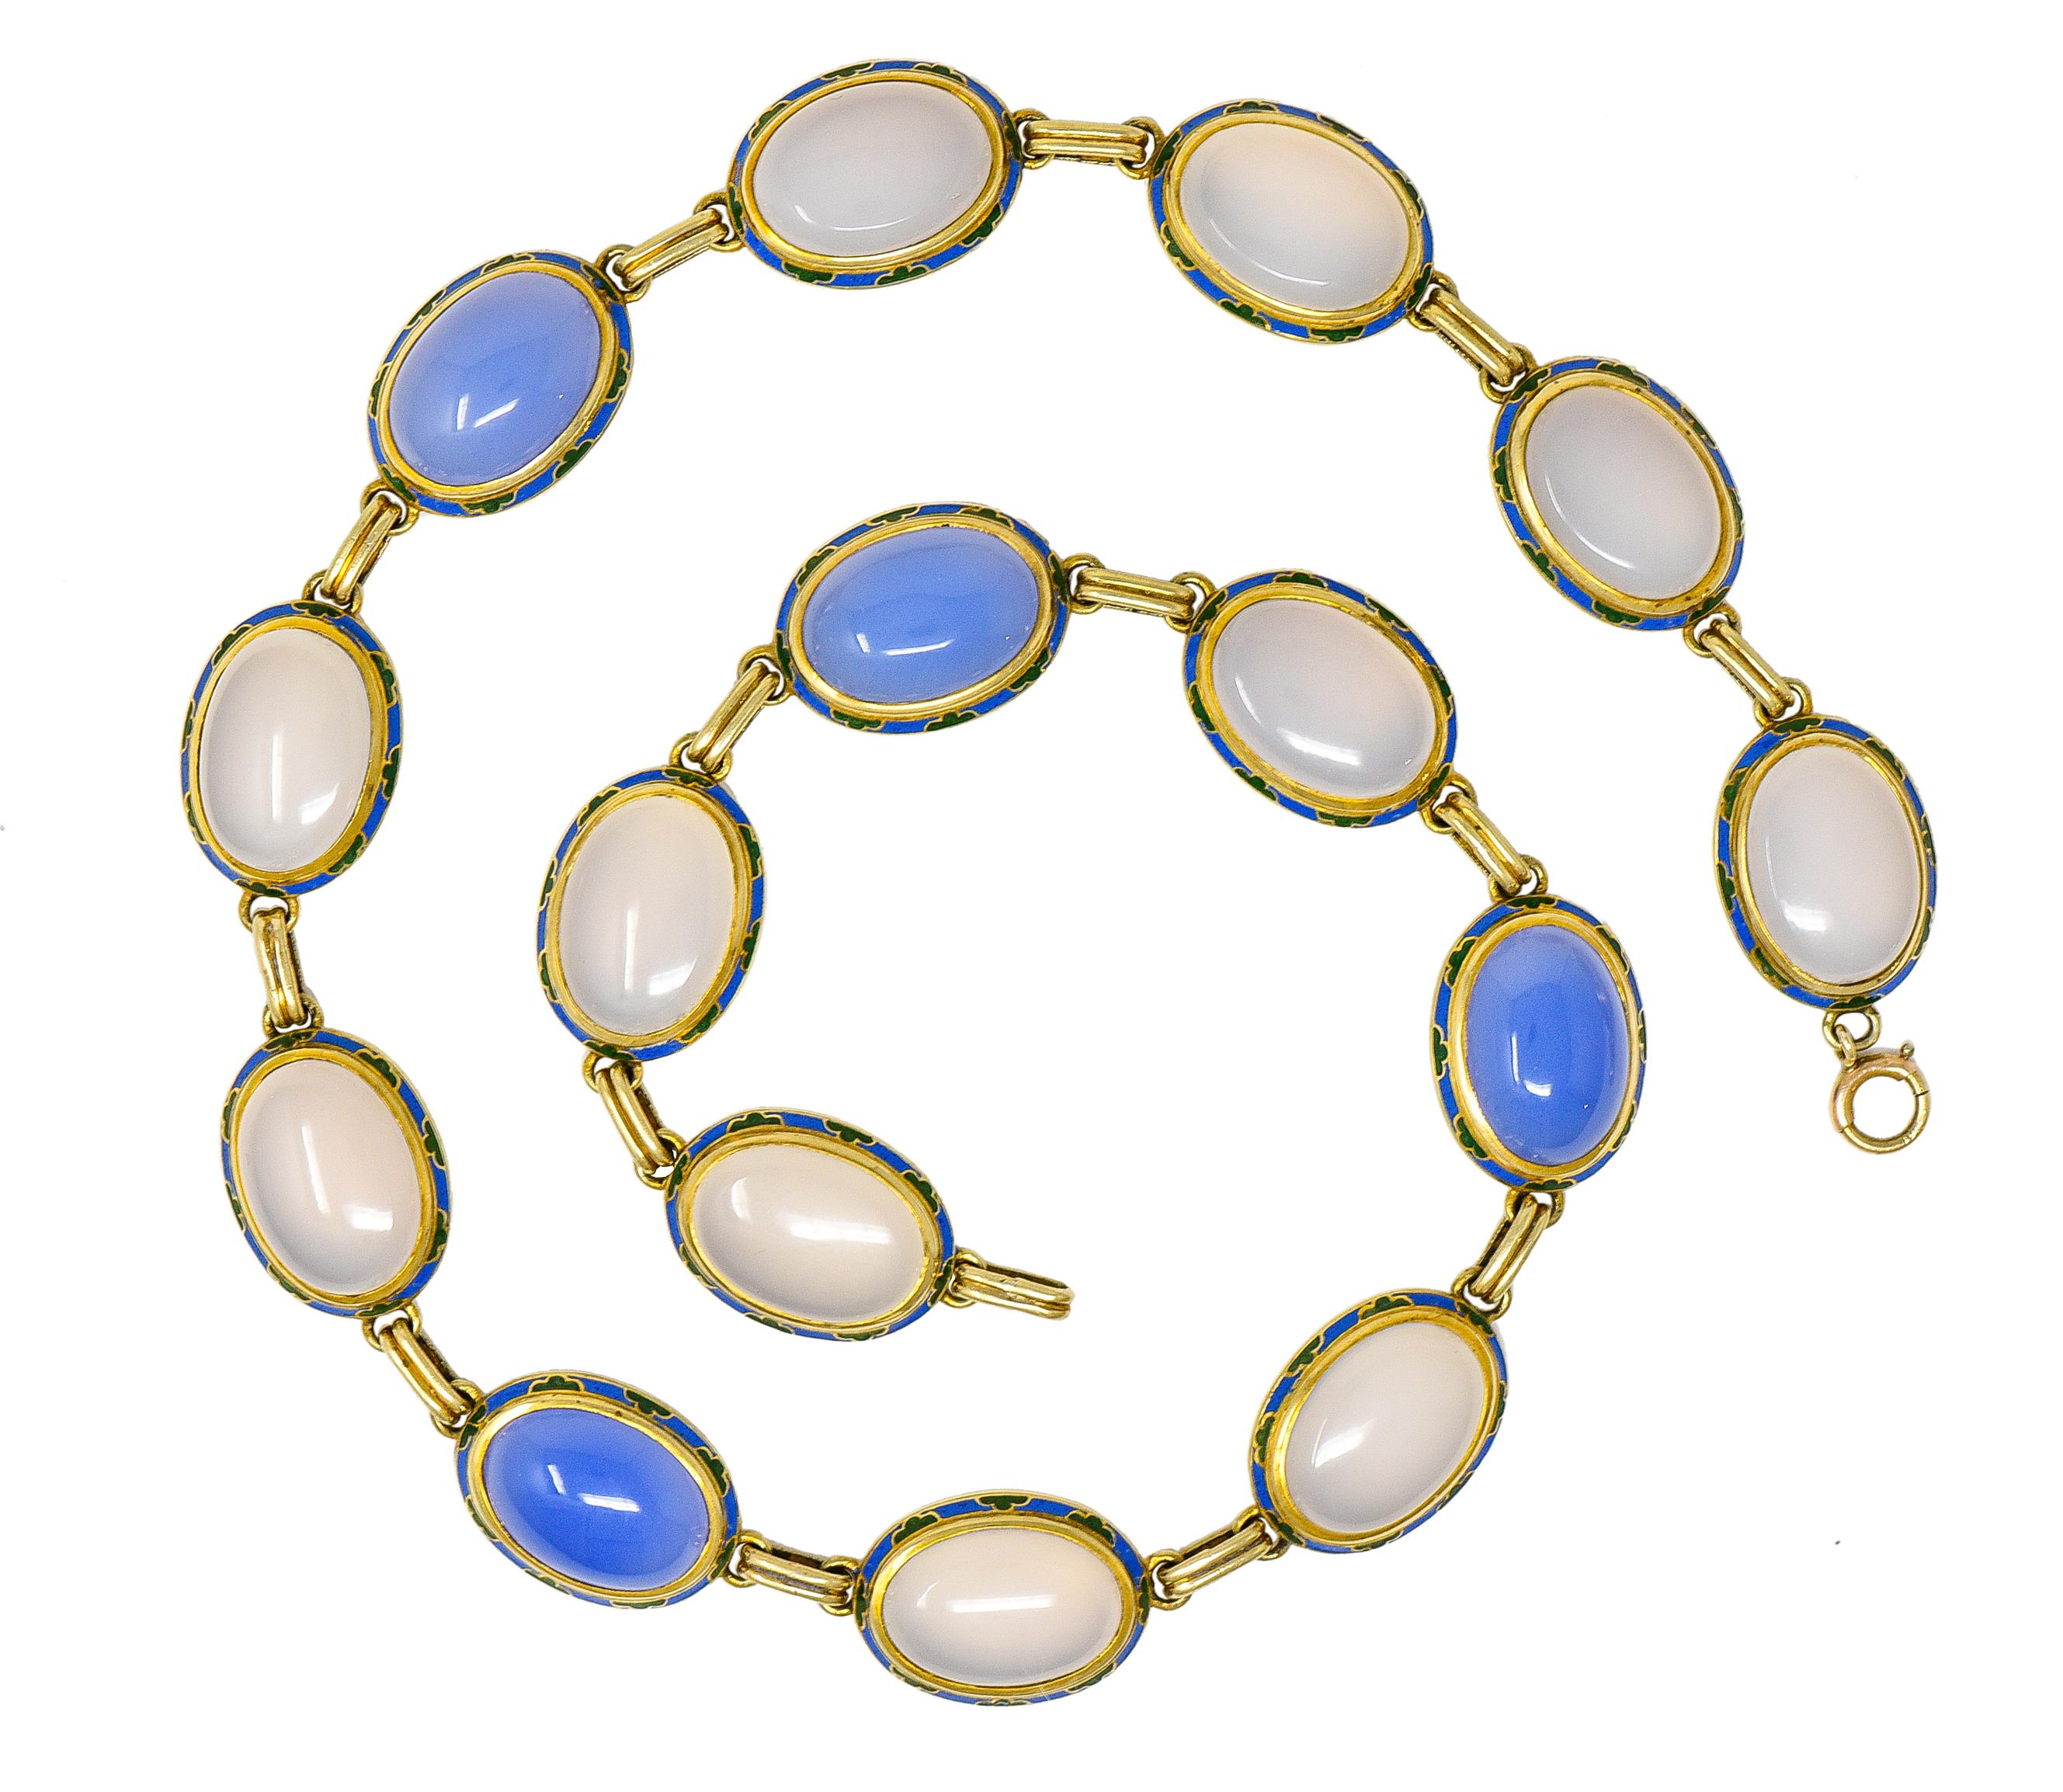 Necklace is comprised of links containing bezel set oval chalcedony cabochons

Translucent with natural pastel blue color and dyed violetish blue color

With polished gold surrounds glossed with cornflower blue and green enamel

Opaque and depicting